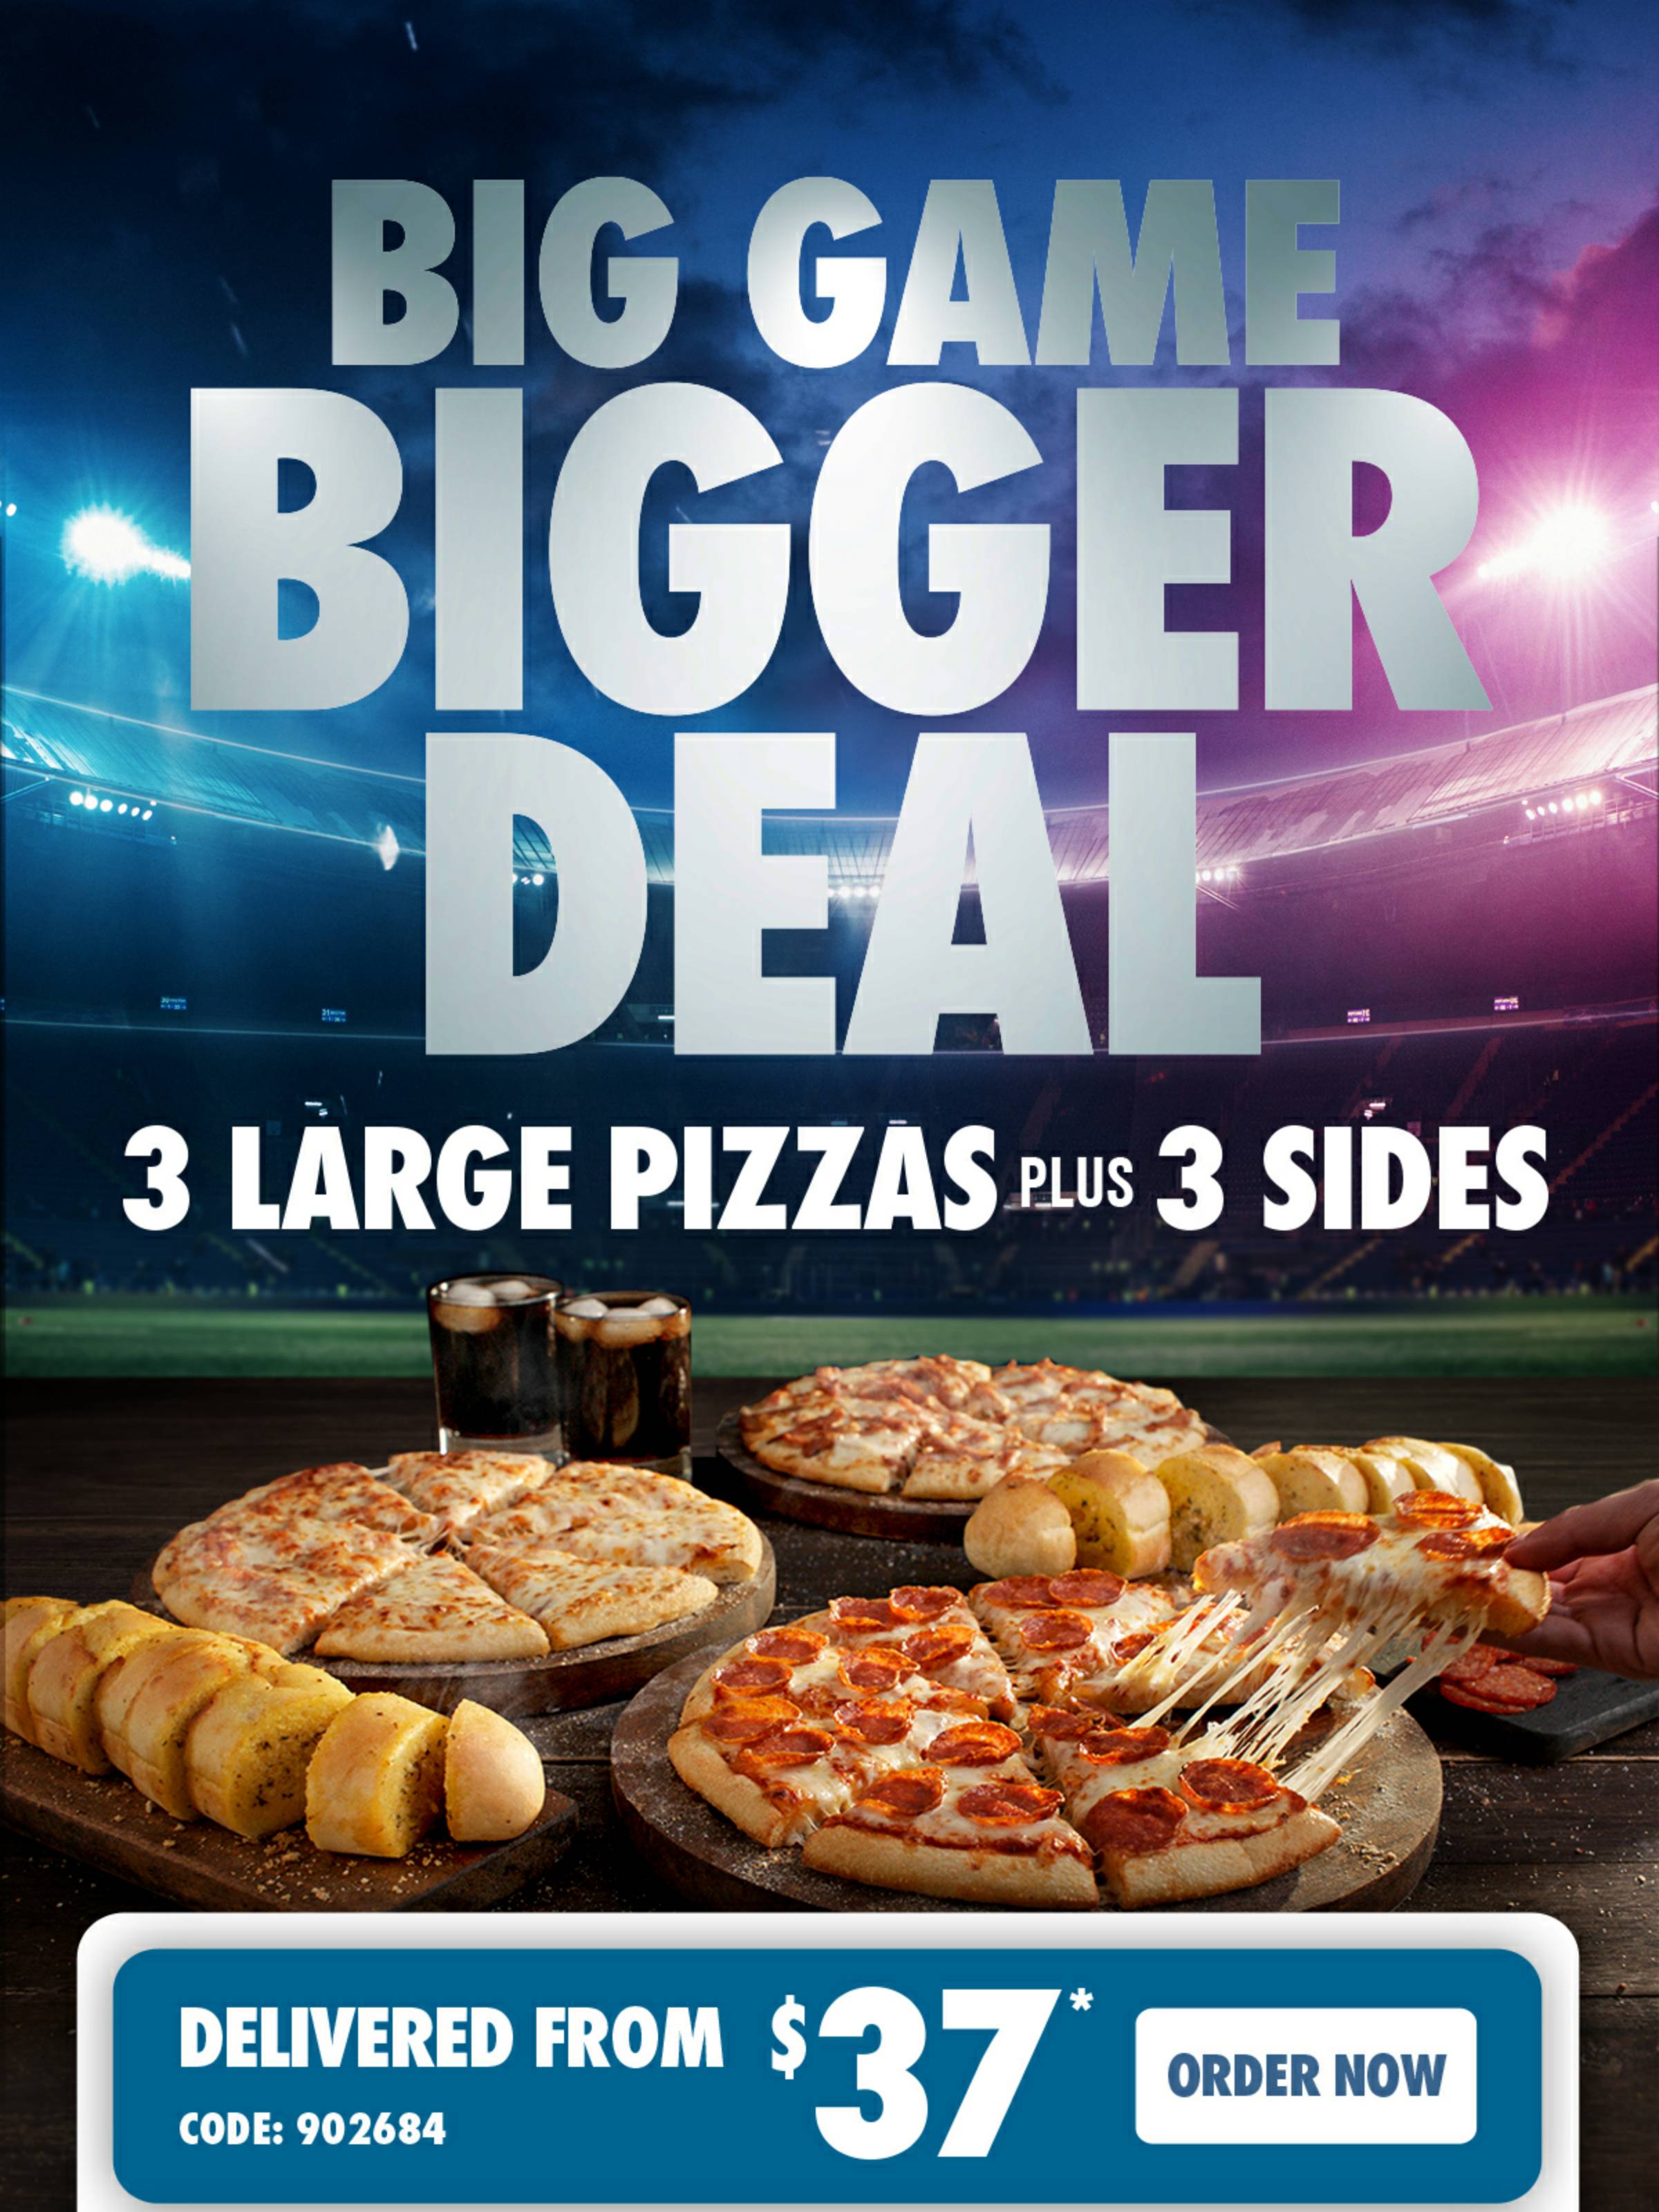 Domino's - 3 Large Pizzas plus 3 Sides $37 Delivered